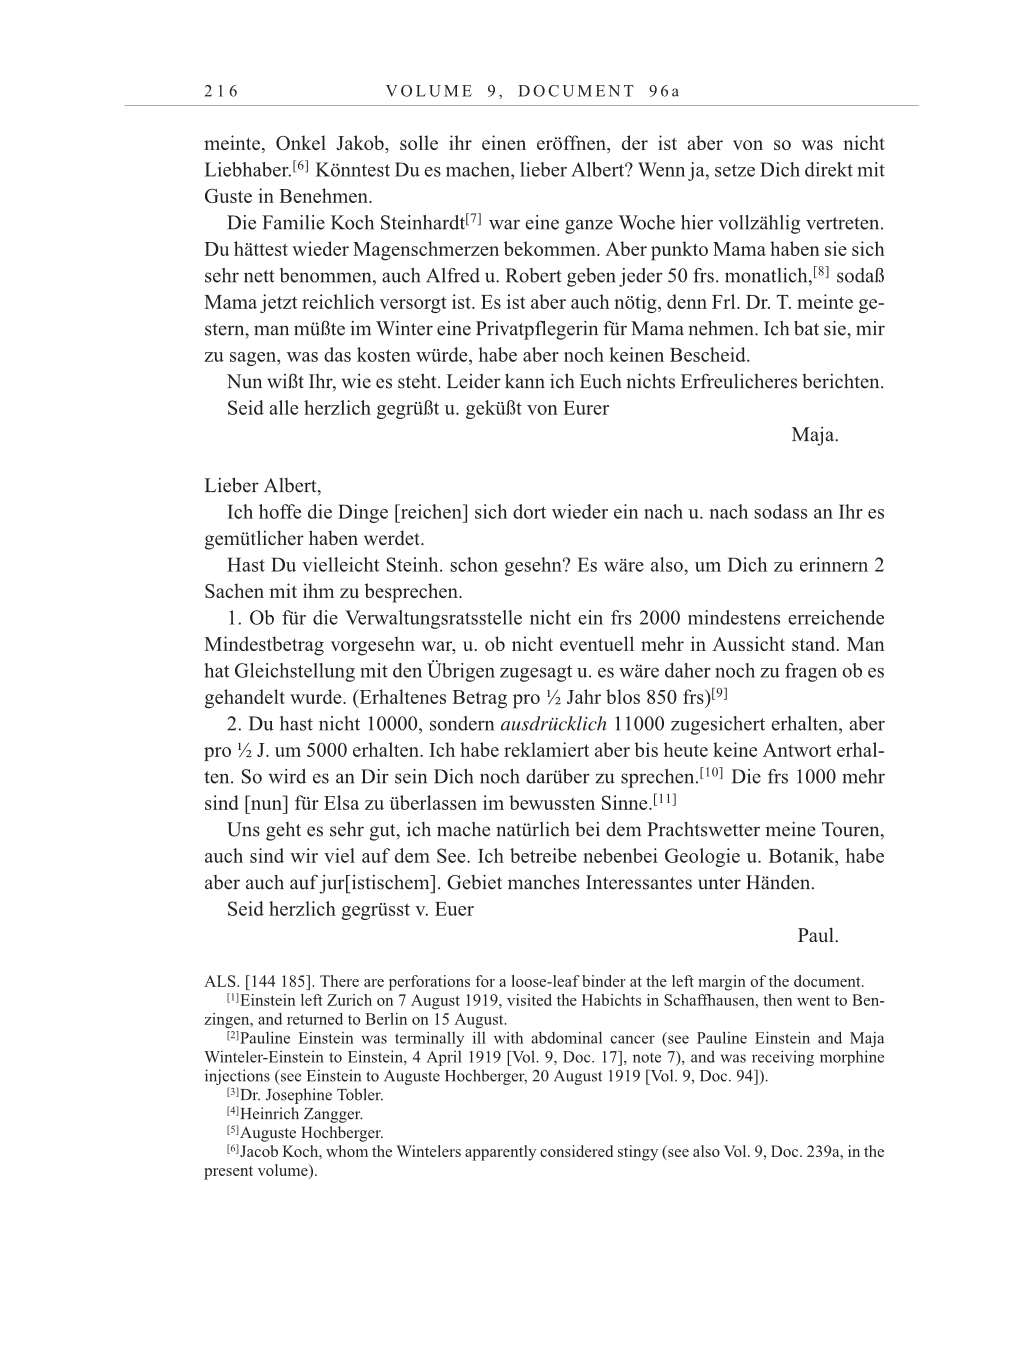 Volume 10: The Berlin Years: Correspondence May-December 1920 / Supplementary Correspondence 1909-1920 page 216